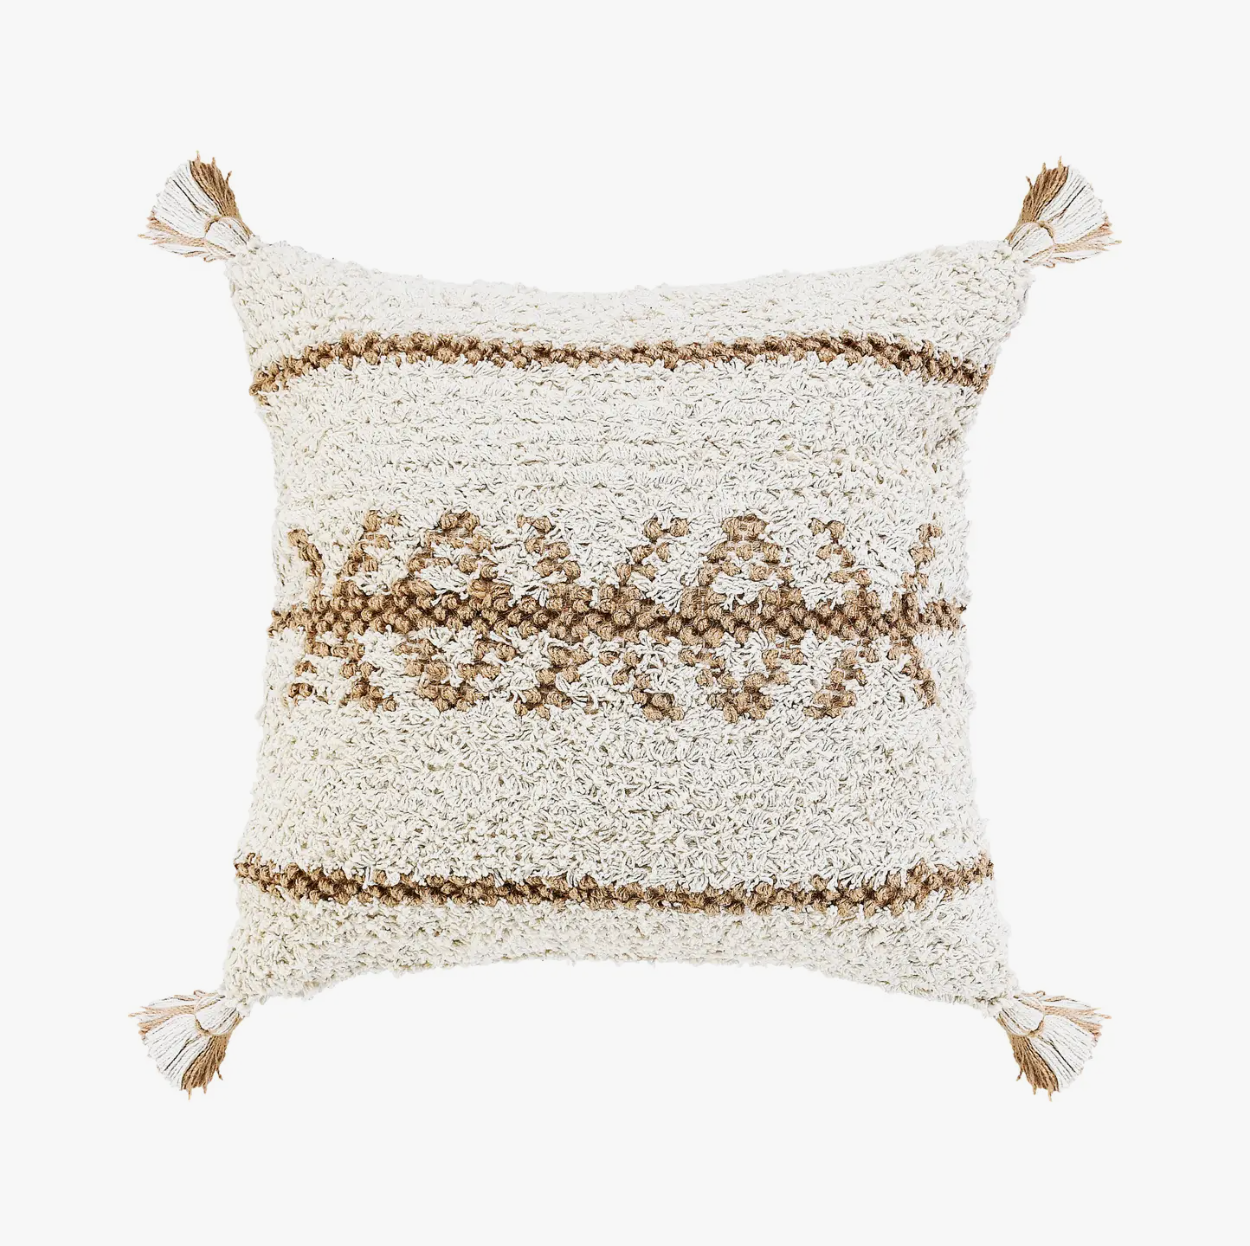 Jute and Cotton Throw Pillow - Square 20" x 20"